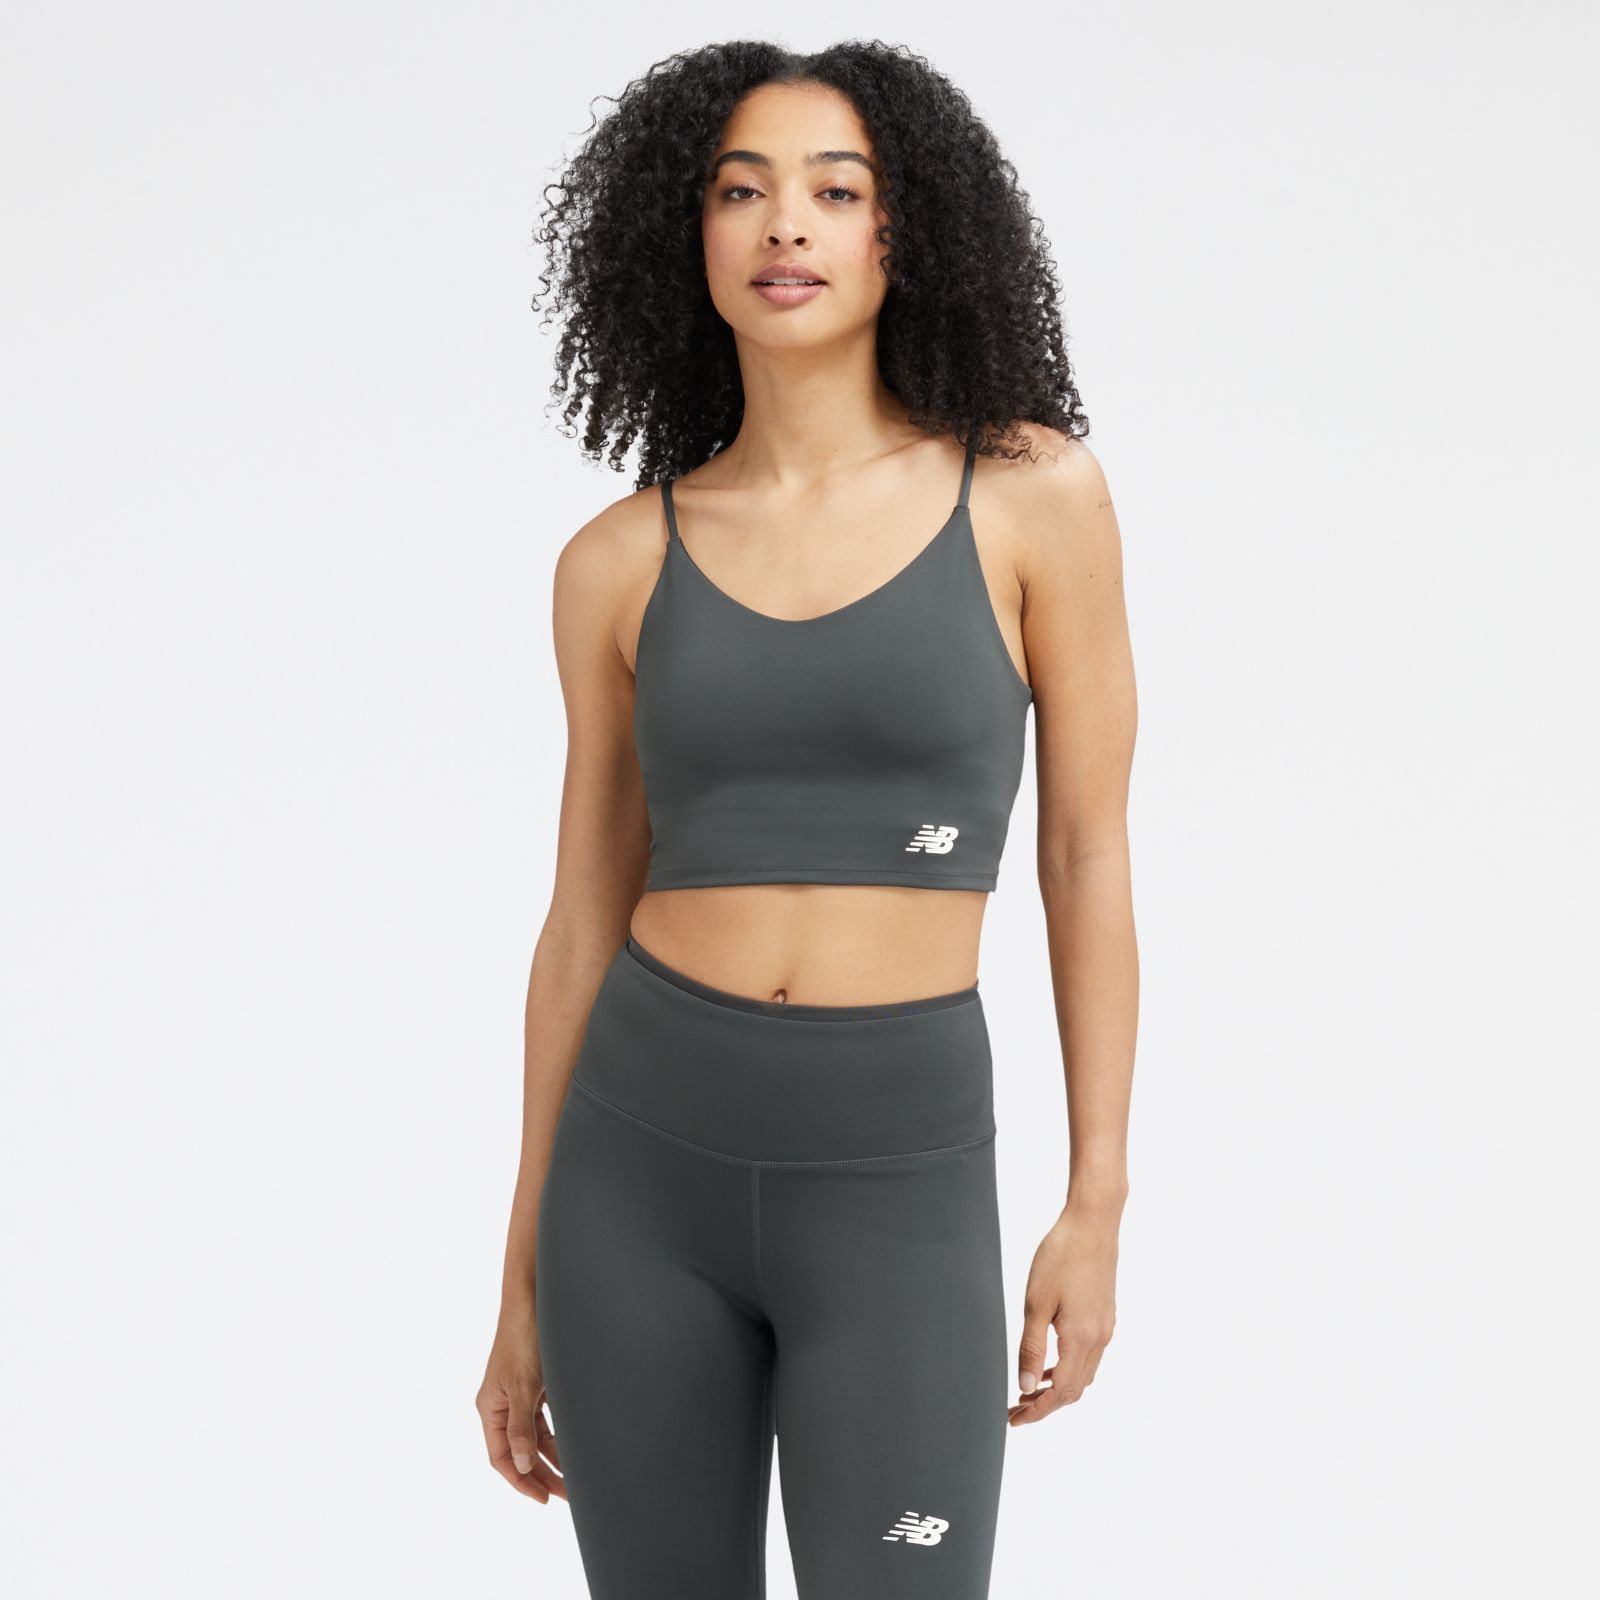 Light & Leaf Top-Rated Sports Bra Is Impressing Activewear Snobs